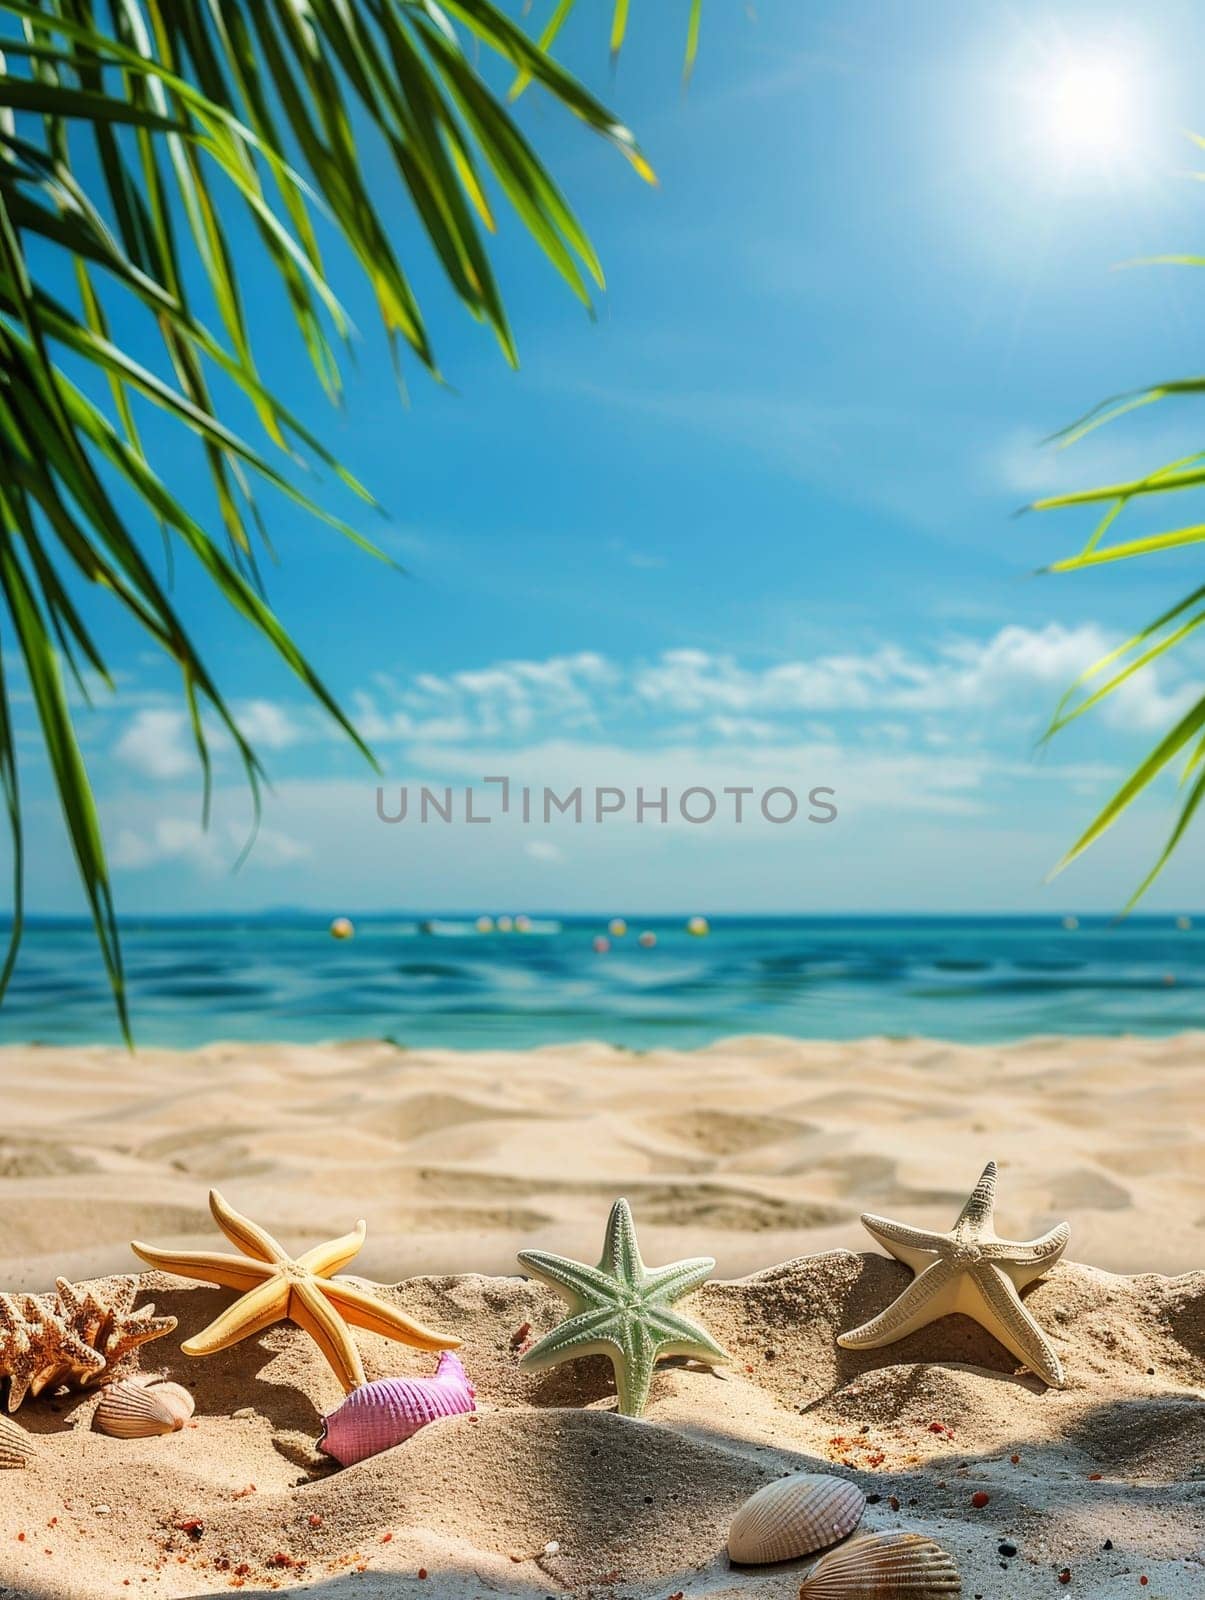 A collection of starfish and shells lies scattered on sunlit sand, framed by tropical palm fronds against a clear blue sky. It's a picturesque moment of coastal beauty and marine discovery.